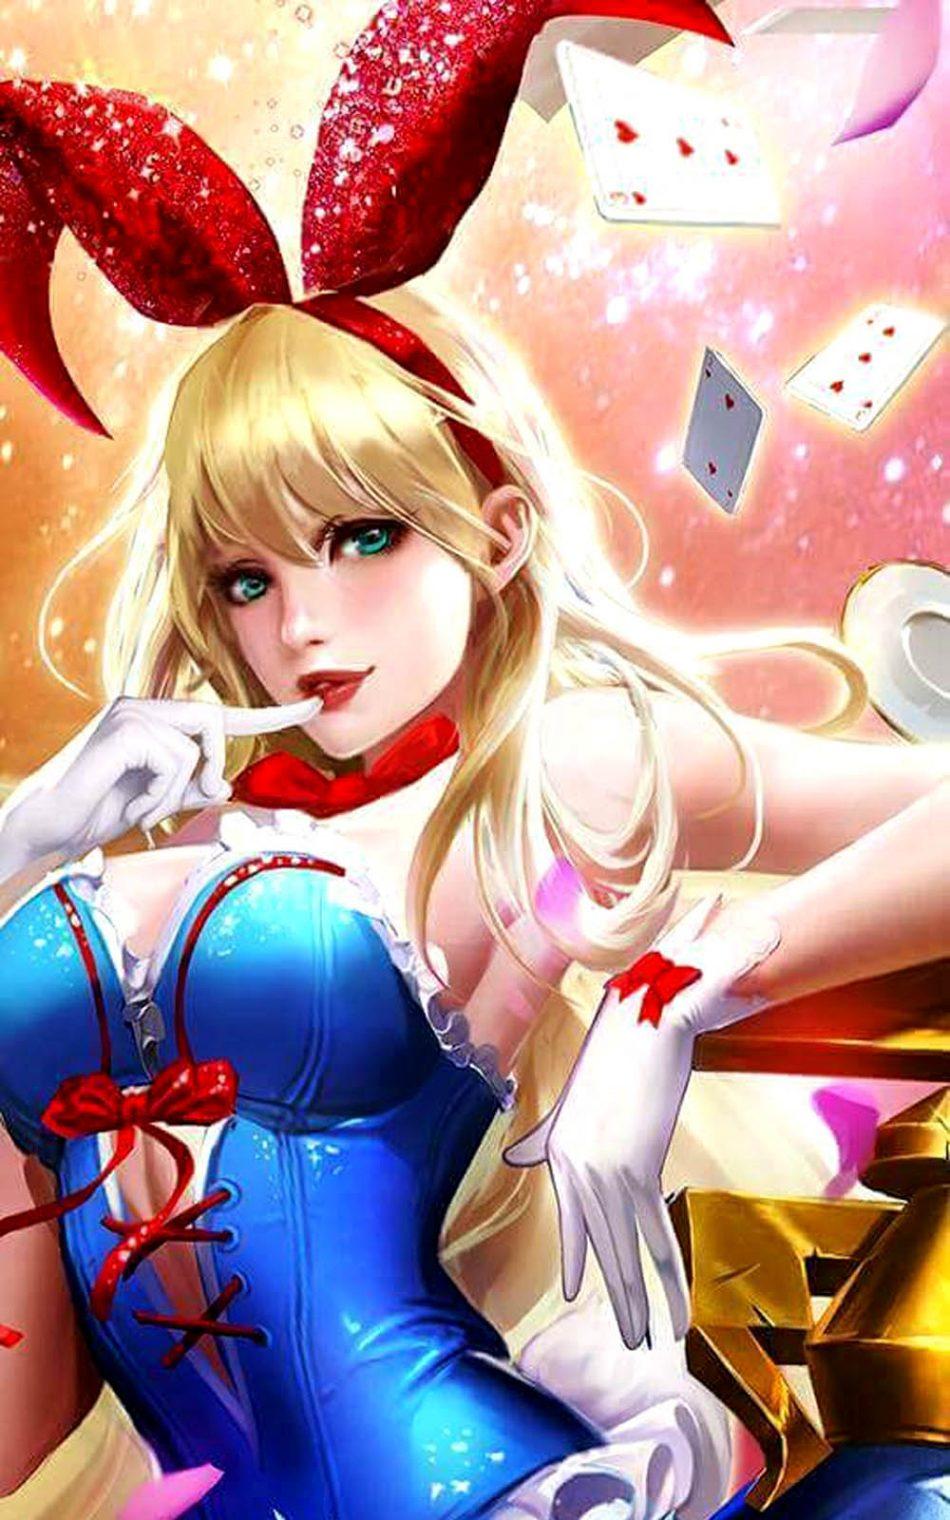 Free download Download The Bunny Girl Layla Mobile Legends